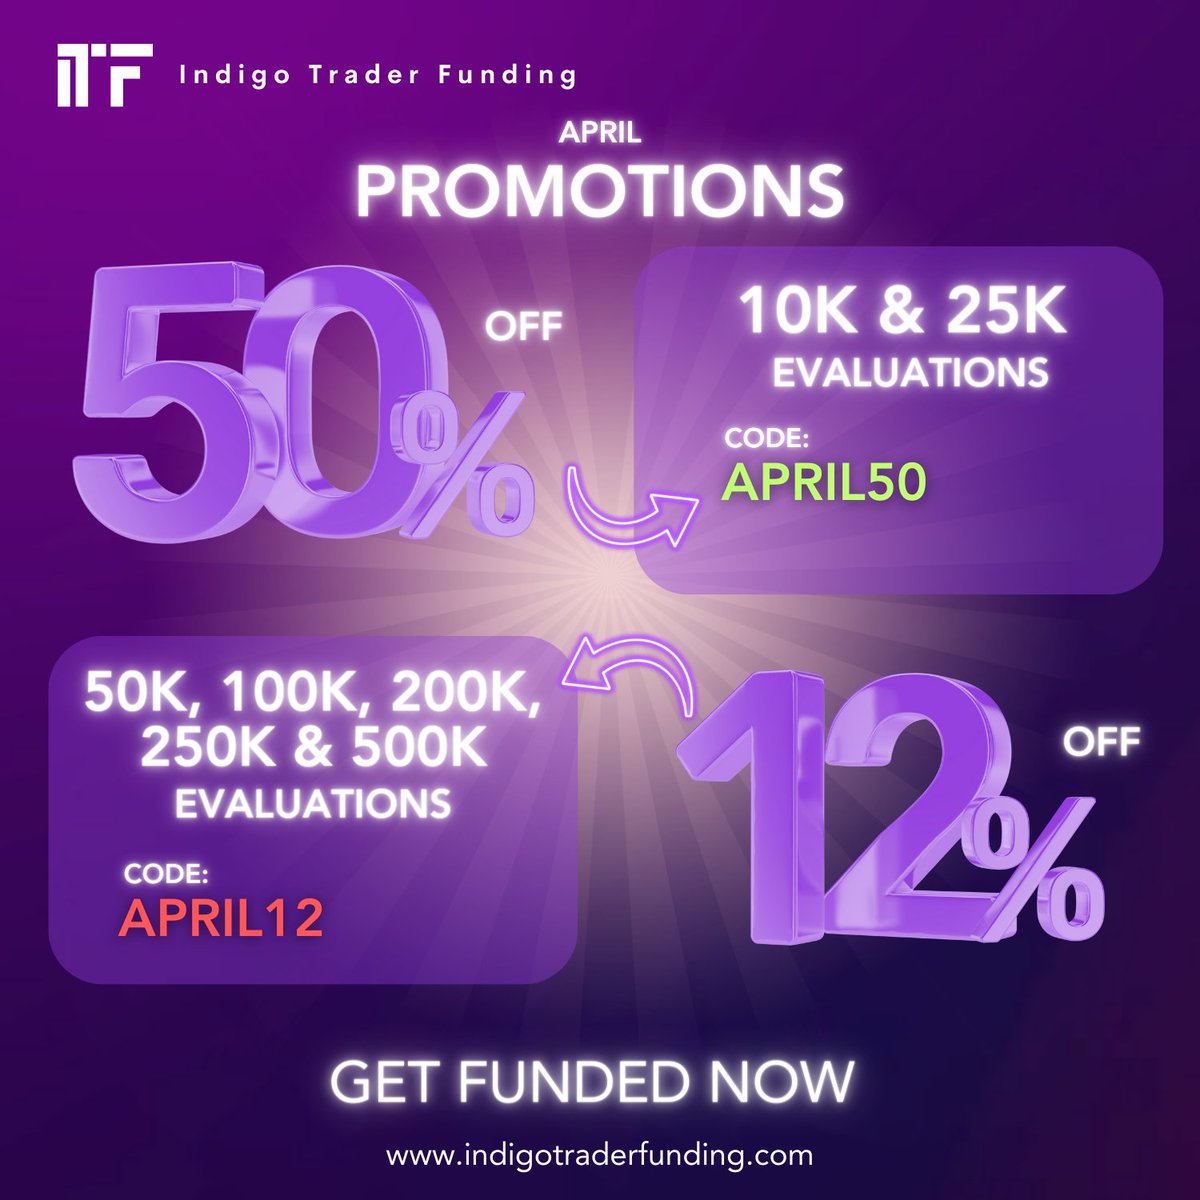 A great weekend to take advantage of our APRIL PROMOTIONS 👇 🚨 50% off ALL 10K and 25K evaluations 👉 25K 3 Step evaluation for $55 👀 🟣 CODE: APRIL50 🚨 12% off ALL other evaluations 🟣 CODE: APRIL12